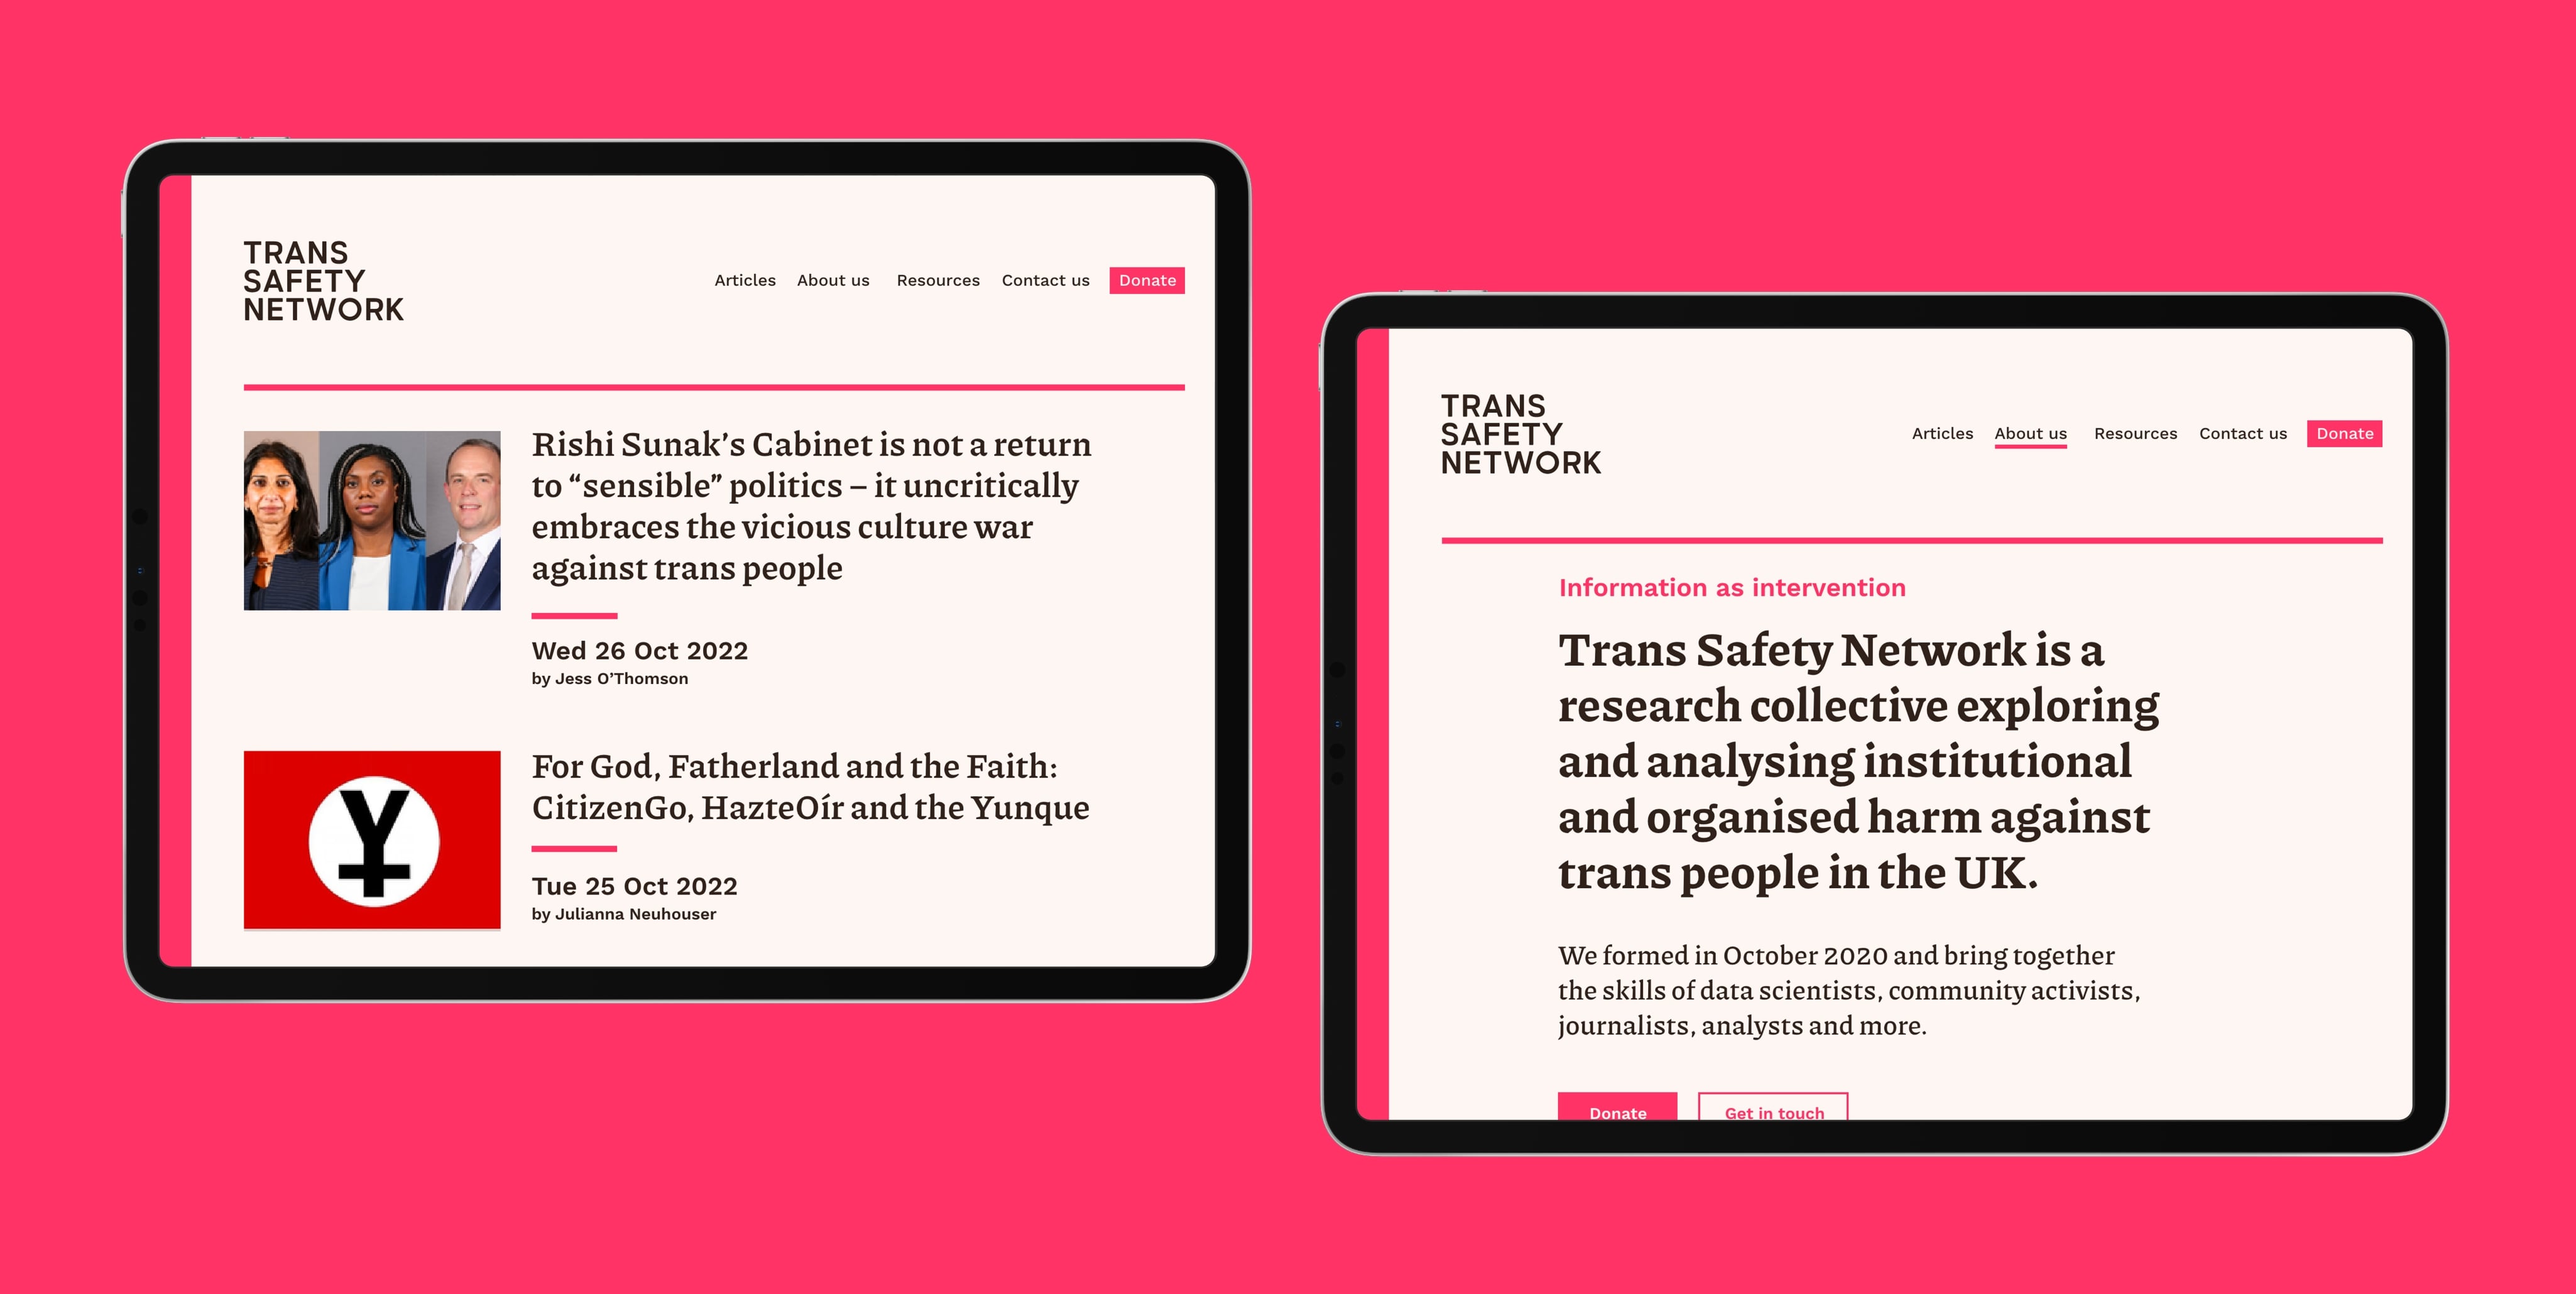 A split image showing two screenshots of the Trans Safety Network website at tablet size on a pink background